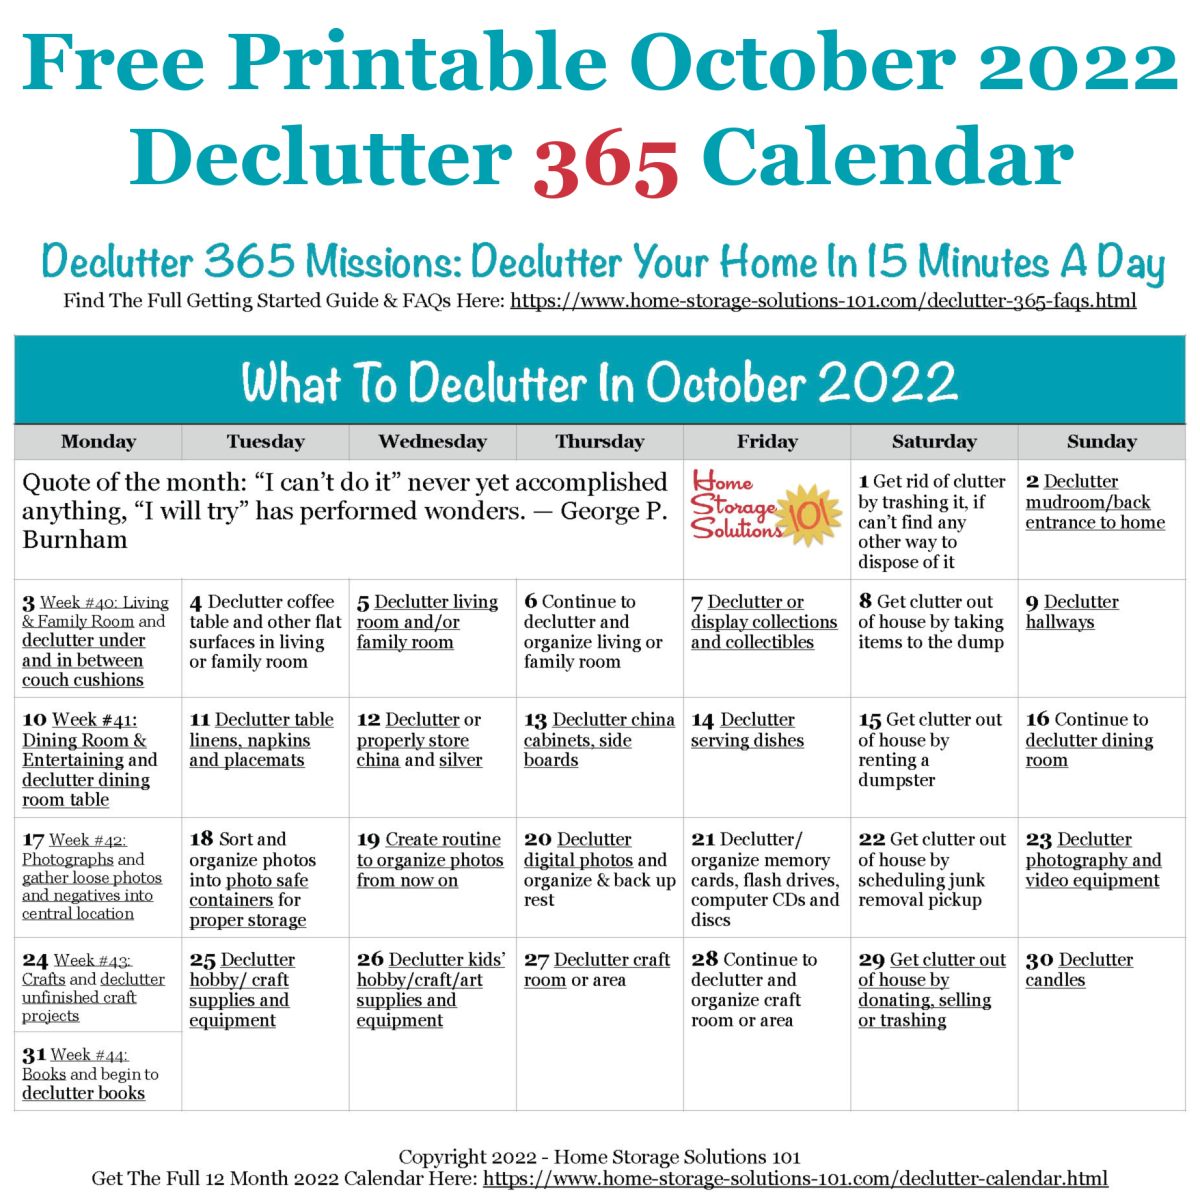 October Declutter 365 Calendar 15 Minute Daily Missions For Month